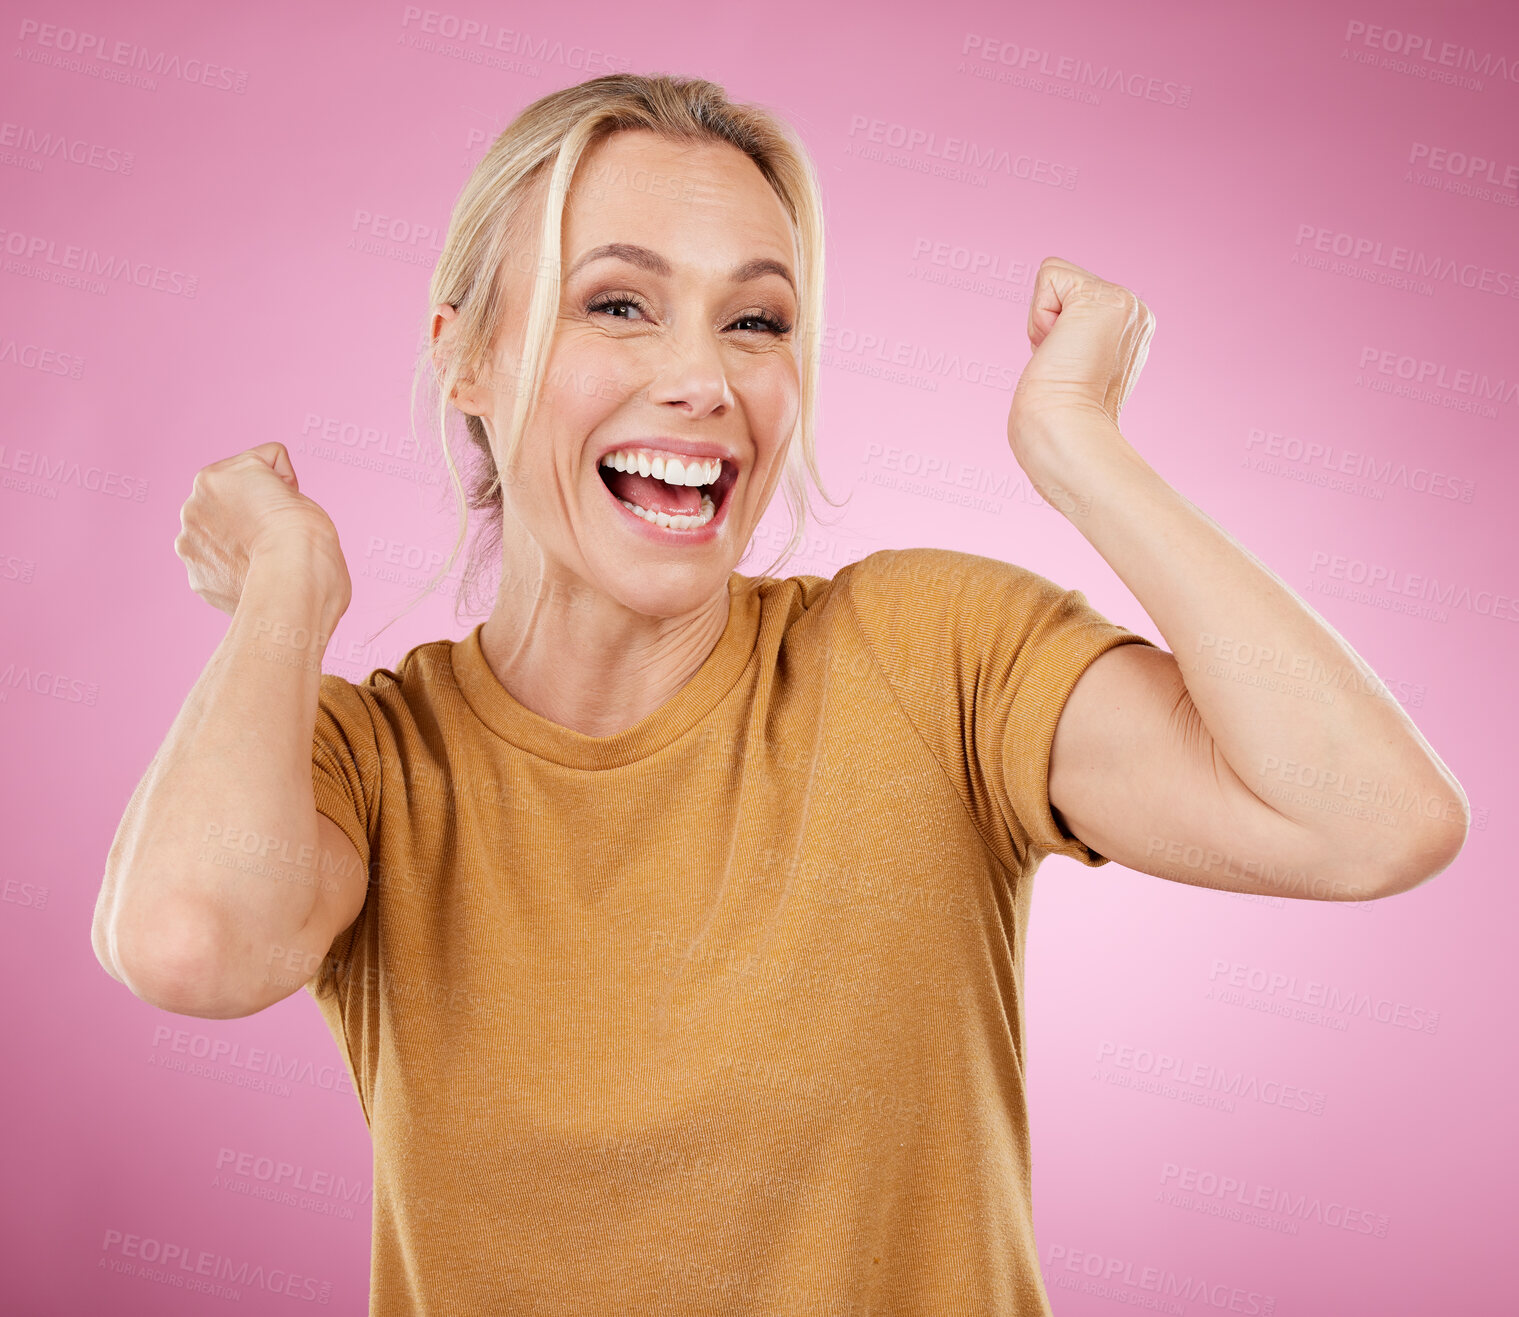 Buy stock photo Excited, winner and winning mature woman cheering for a prize isolated against a pink studio background happy and smile. Portrait, celebration and older female celebrate win feeling cheerful